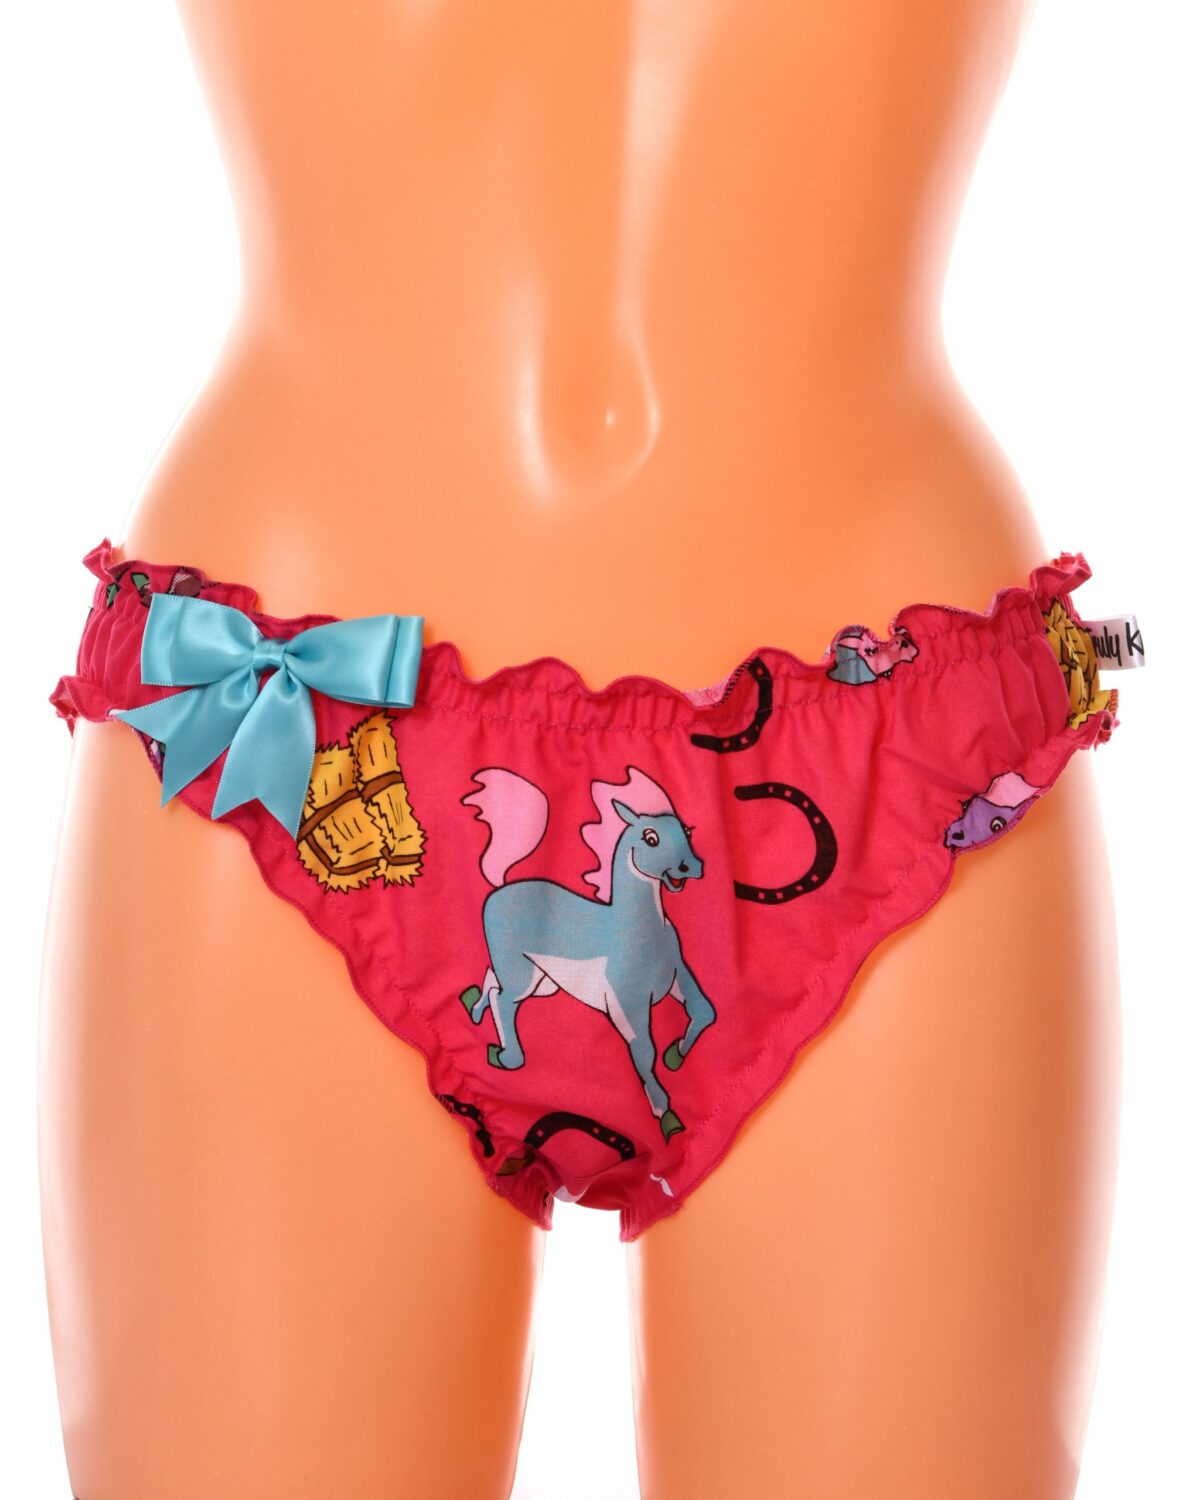 My Little Pony Knickers Panties Blue Pink Womens Underwear UK Sizes 6 to 16